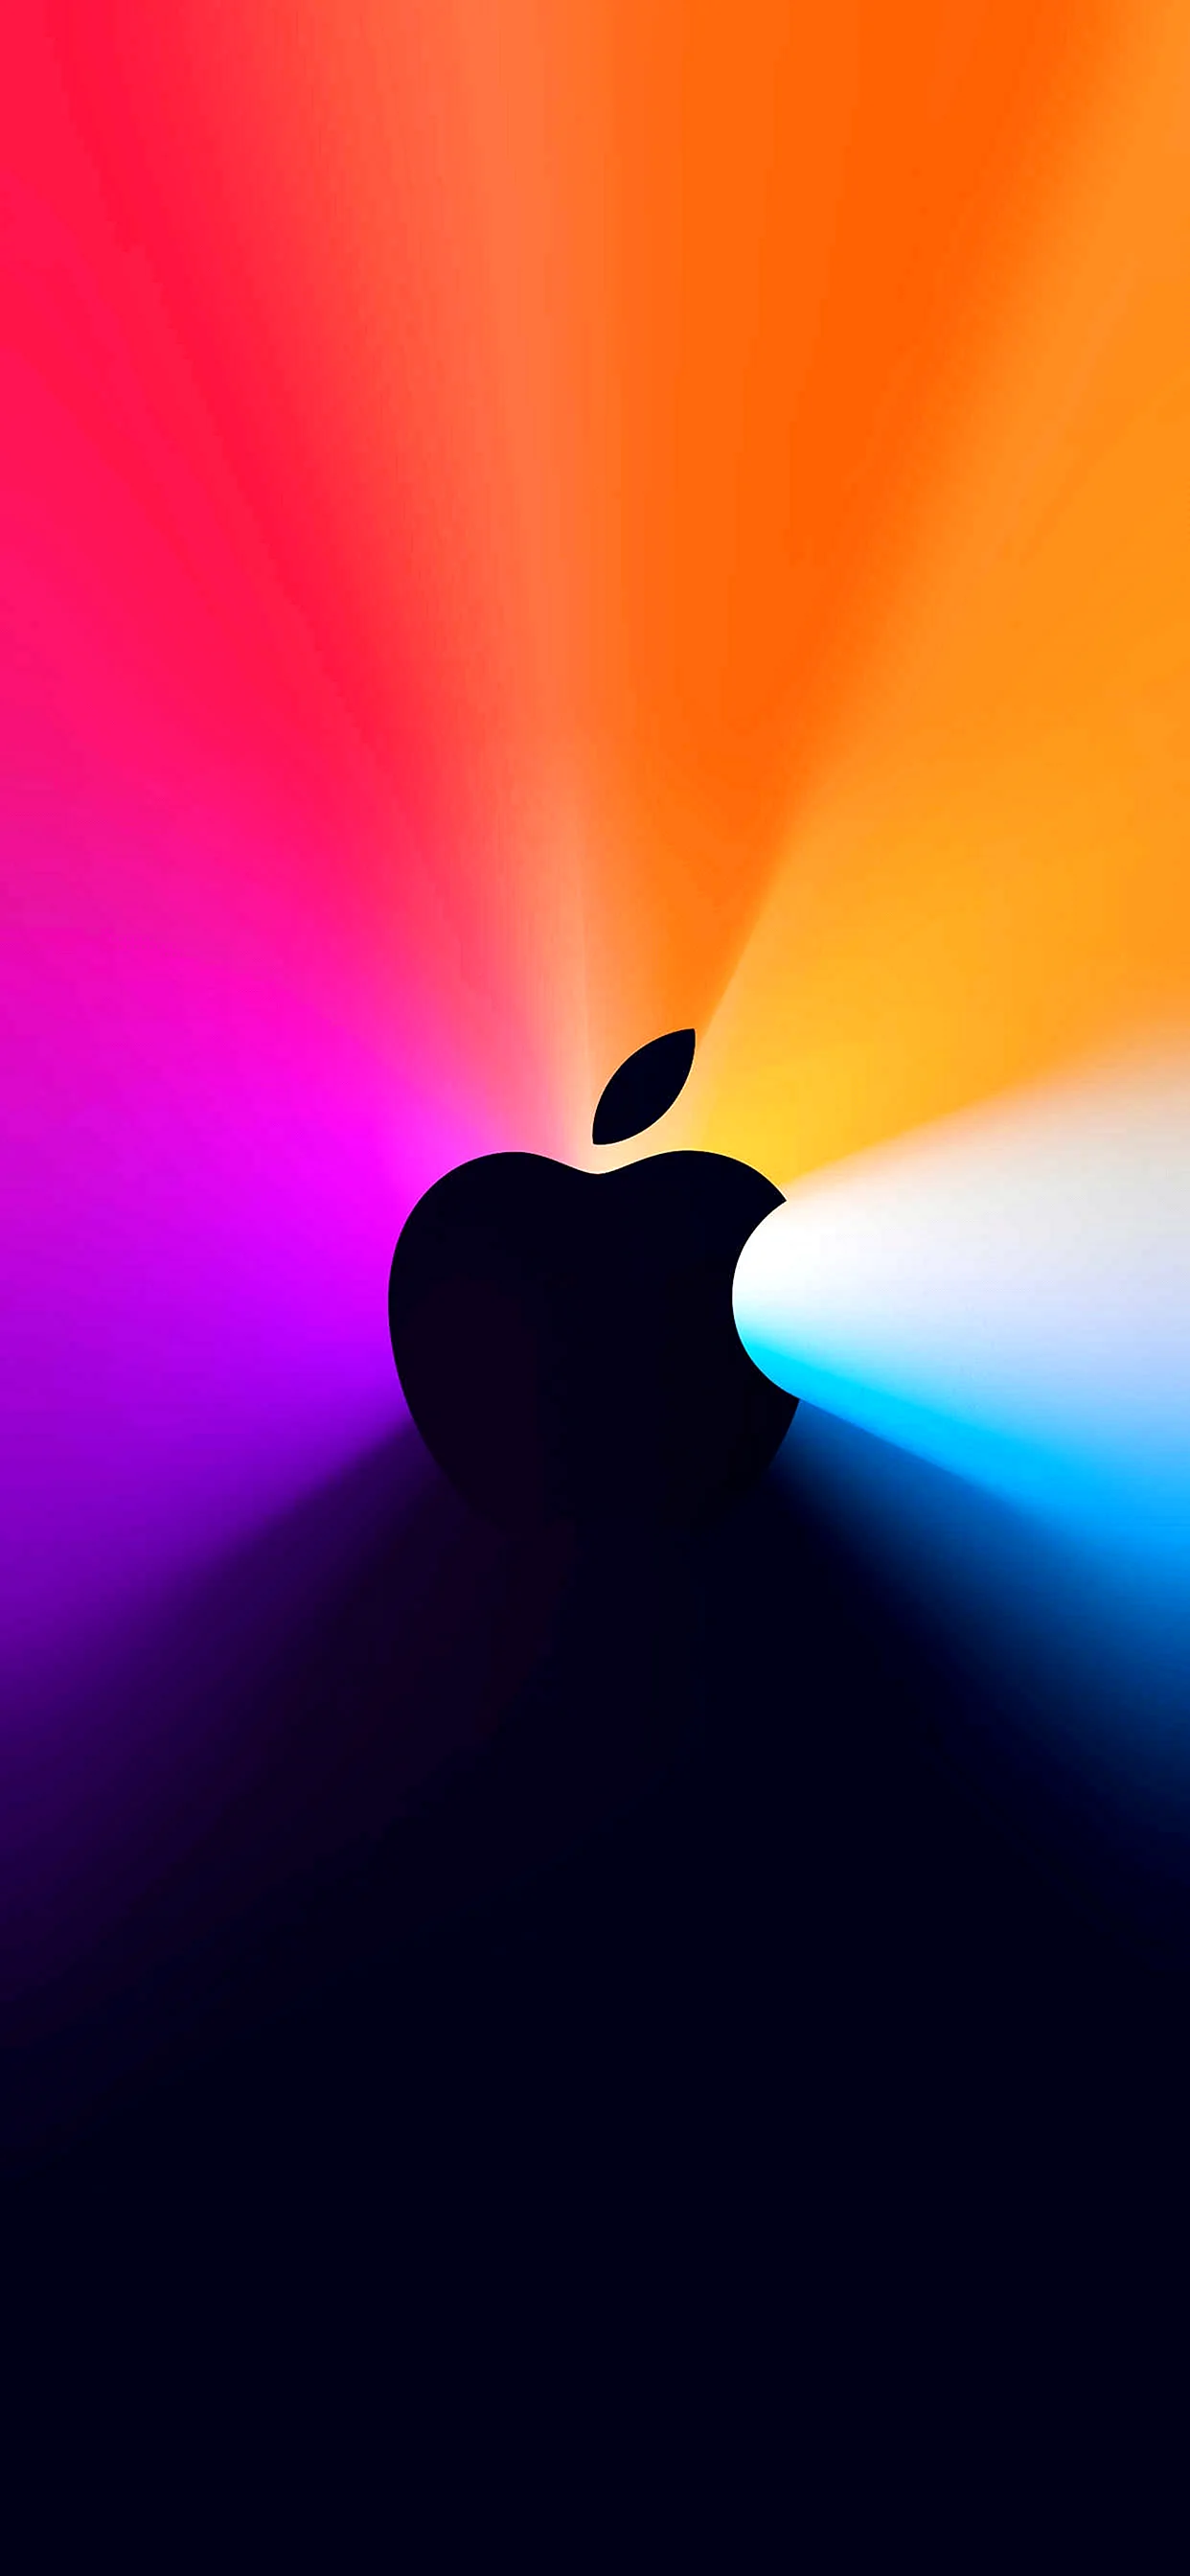 Apple Wallpaper for iPhone 11 Pro Max